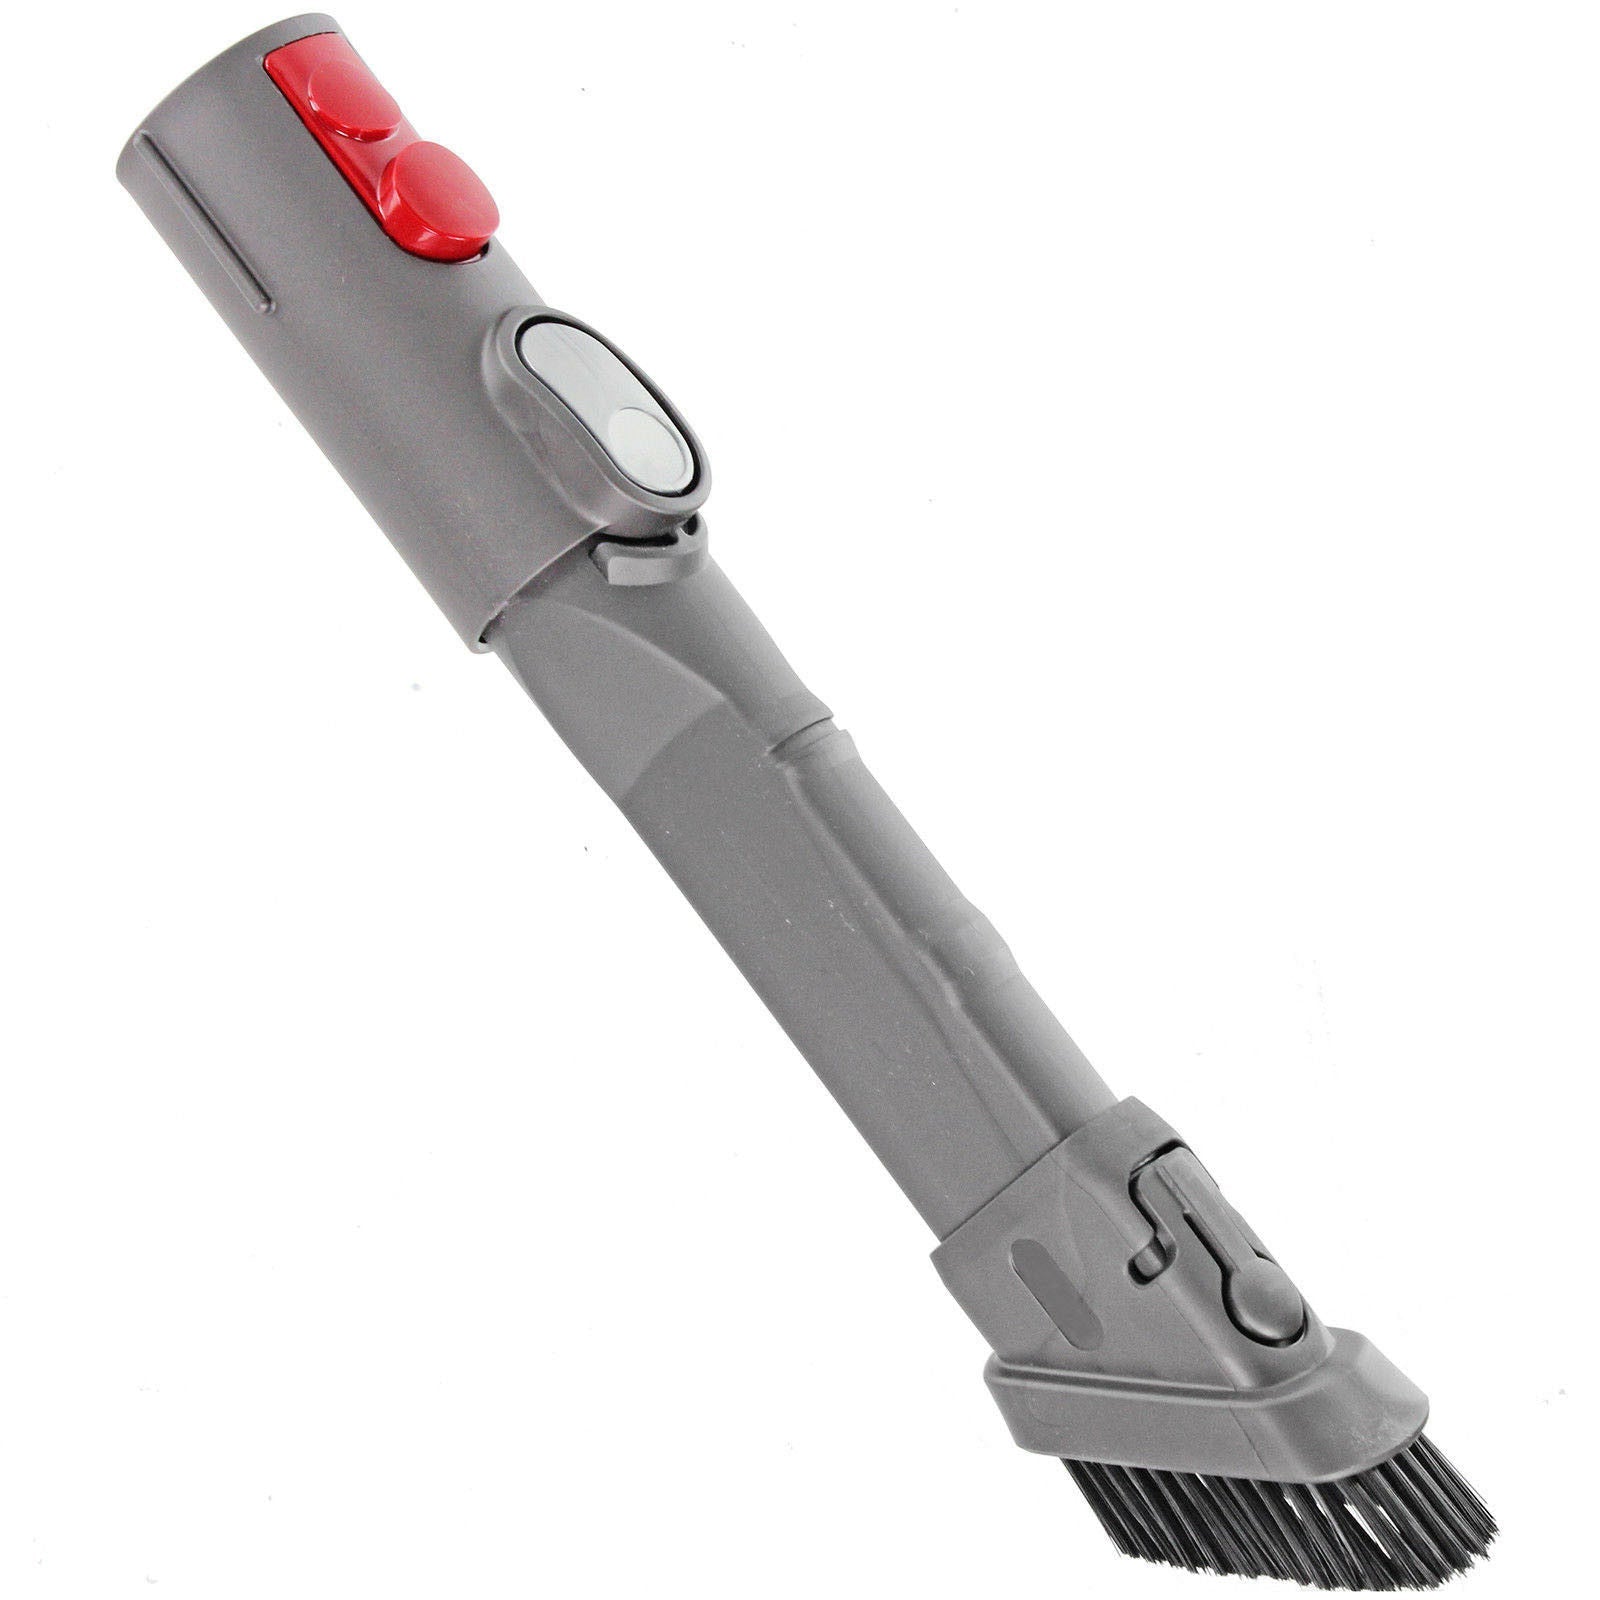 Slim Crevice / Brush 2in1 Tool compatible with DYSON Vacuum Cleaners